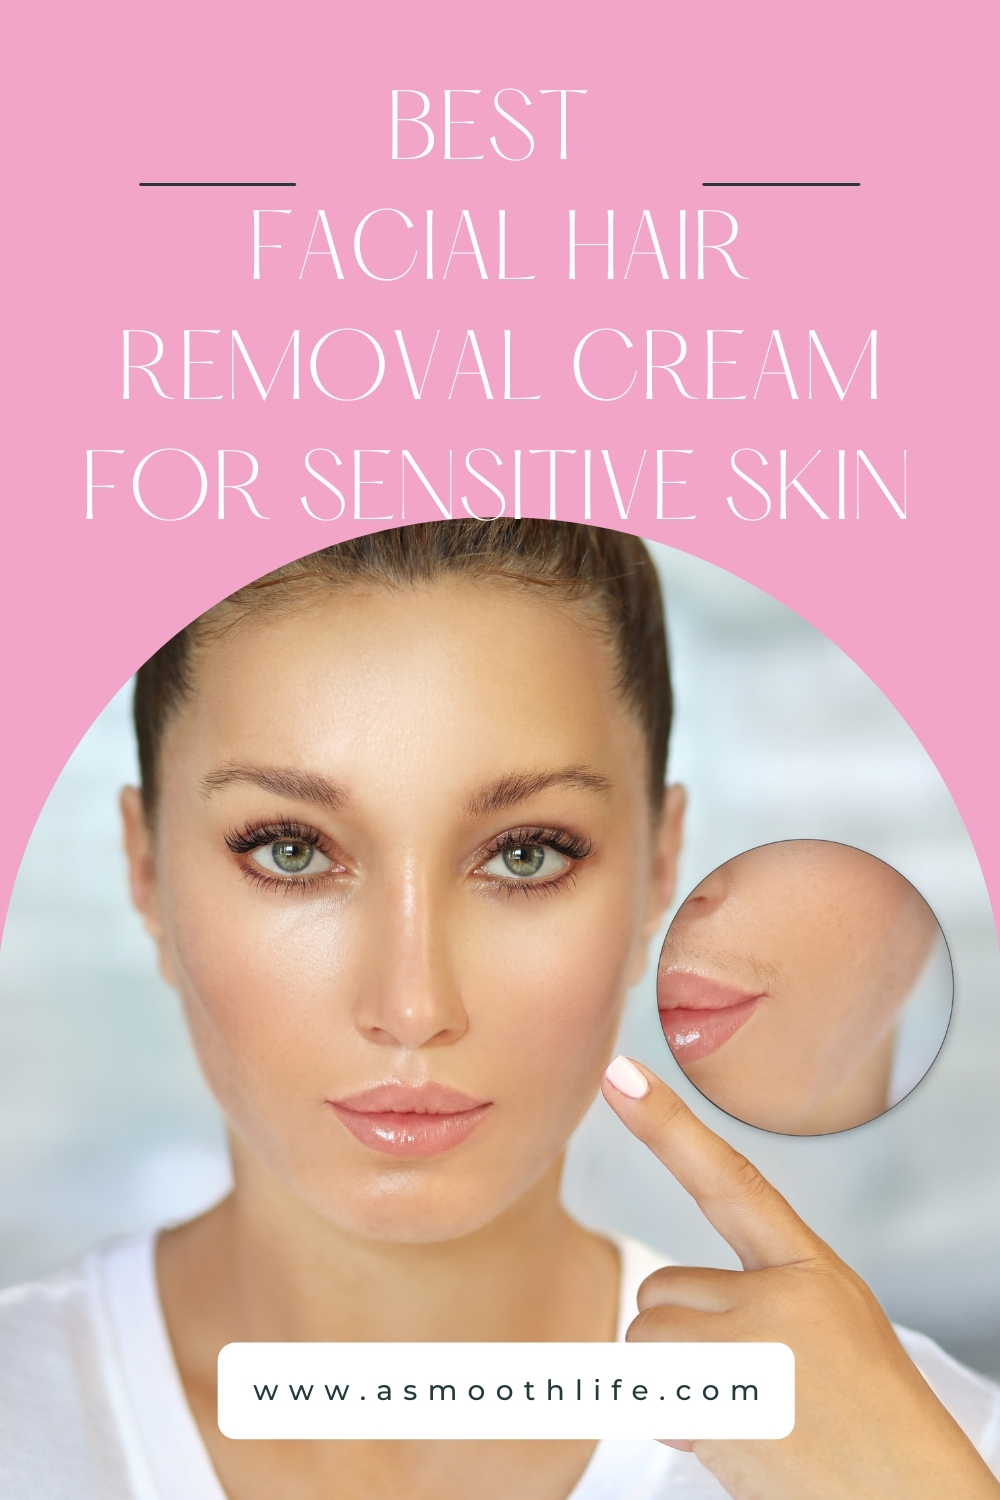 Best Facial Hair Removal Cream for Sensitive Skin | A Smooth Life